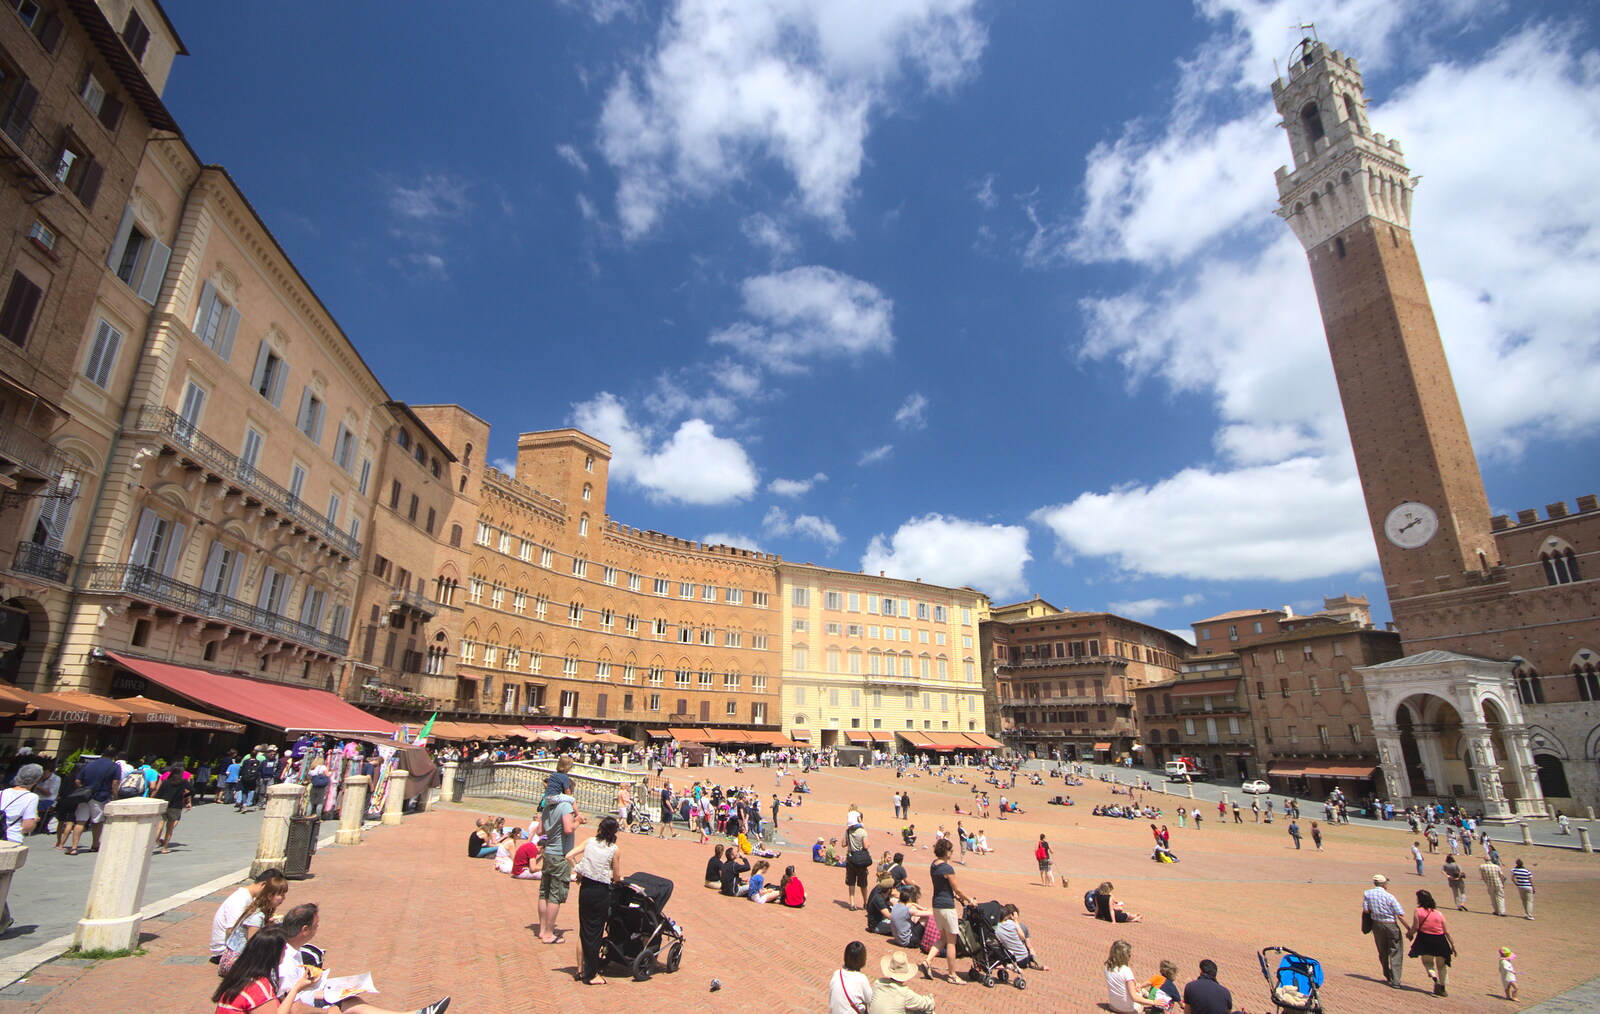 A Tuscan Winery and a Trip to Siena, Tuscany, Italy - 10th June 2013: Another fish-eye of the piazza